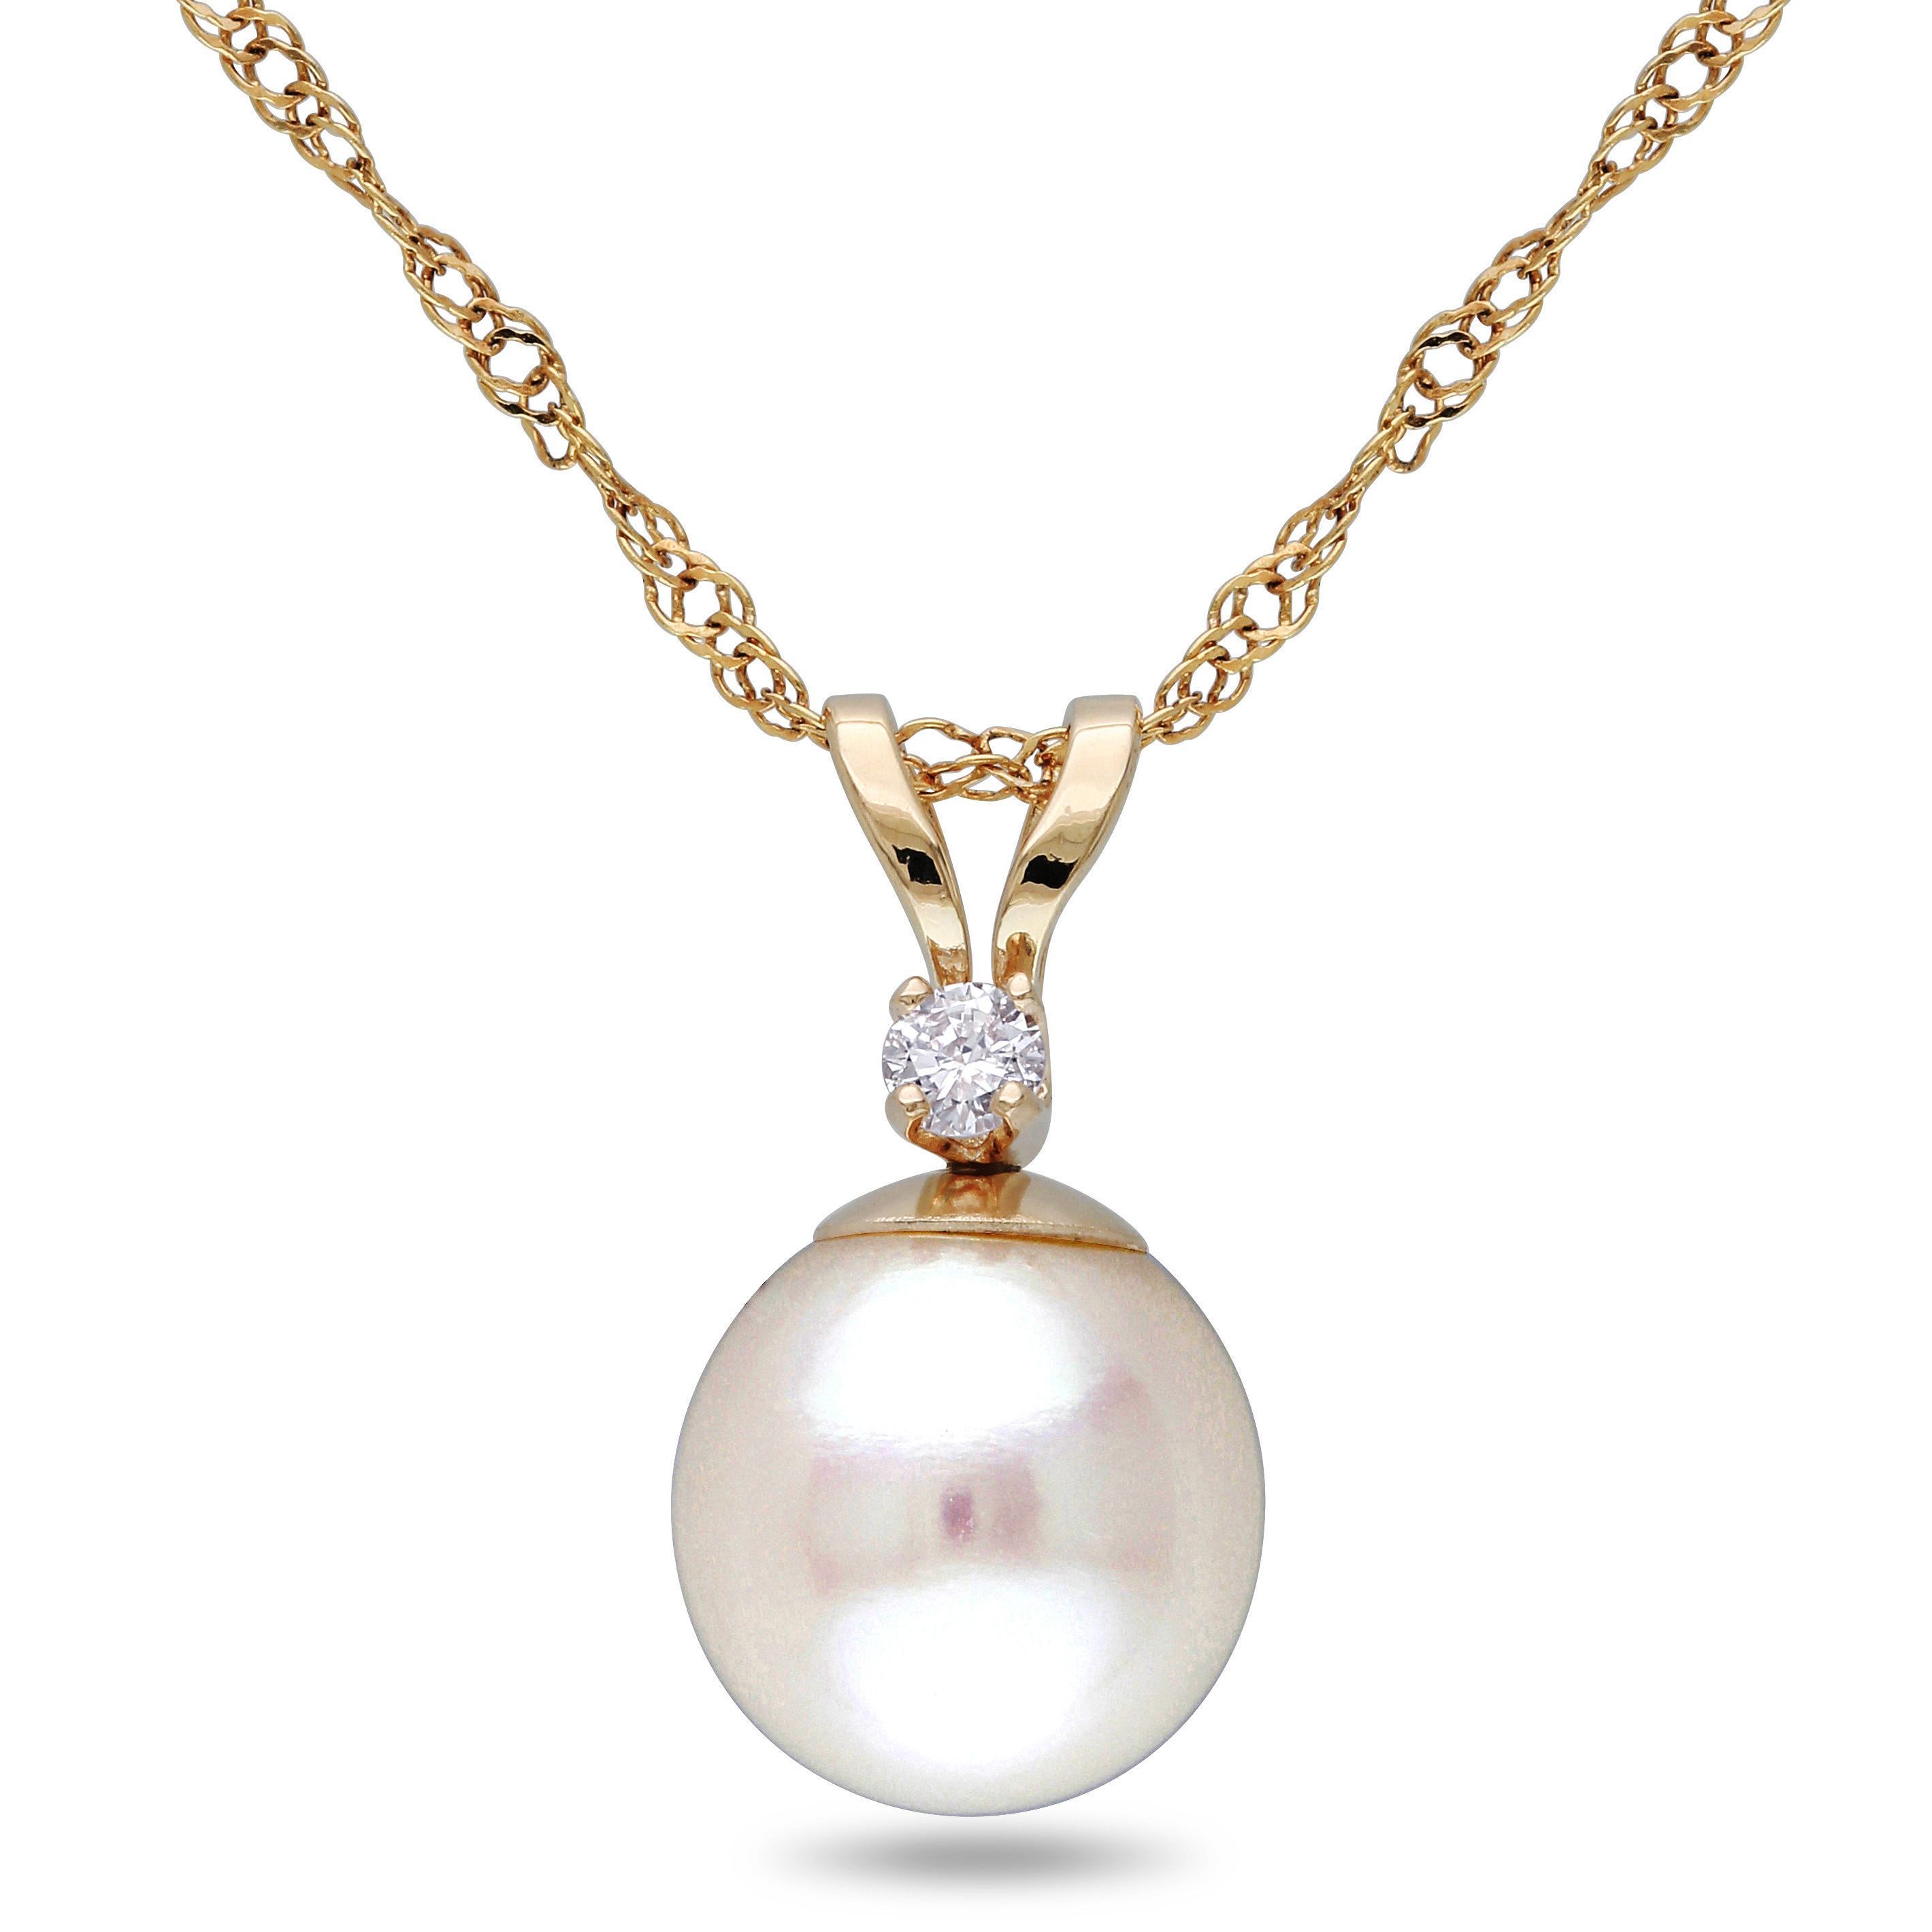 7-7.5 MM Cultured Freshwater Pearl and Diamond Accent Pendant with Chain in 14k Yellow Gold